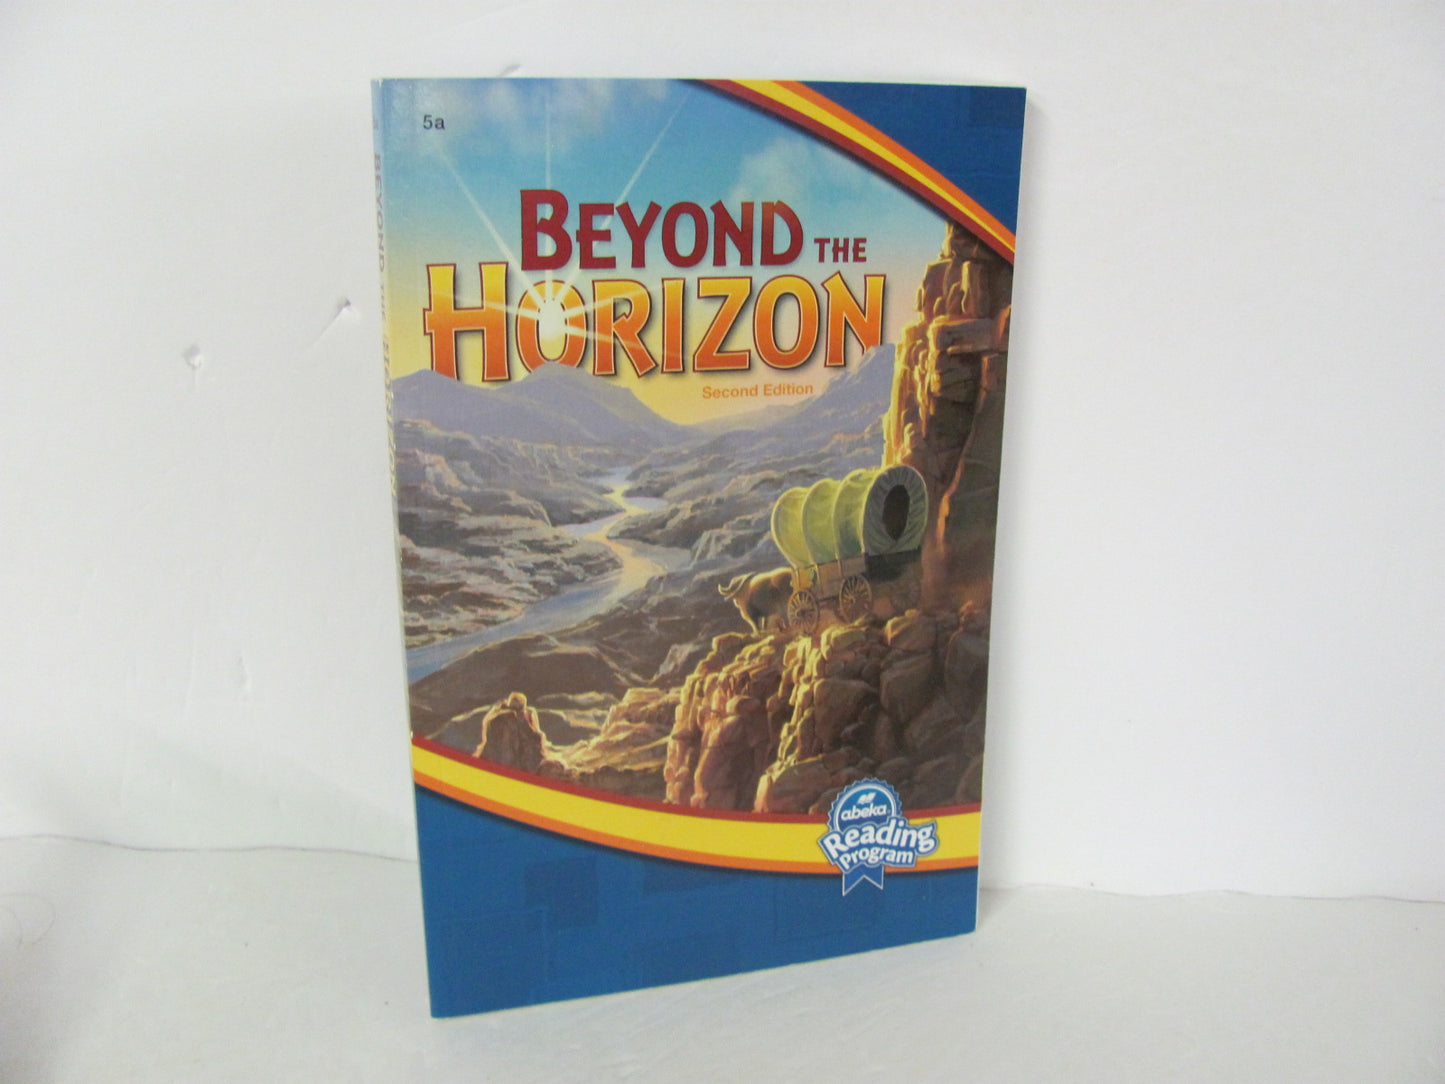 Beyond the Horizon Abeka Student Book Pre-Owned 5th Grade Reading Textbooks